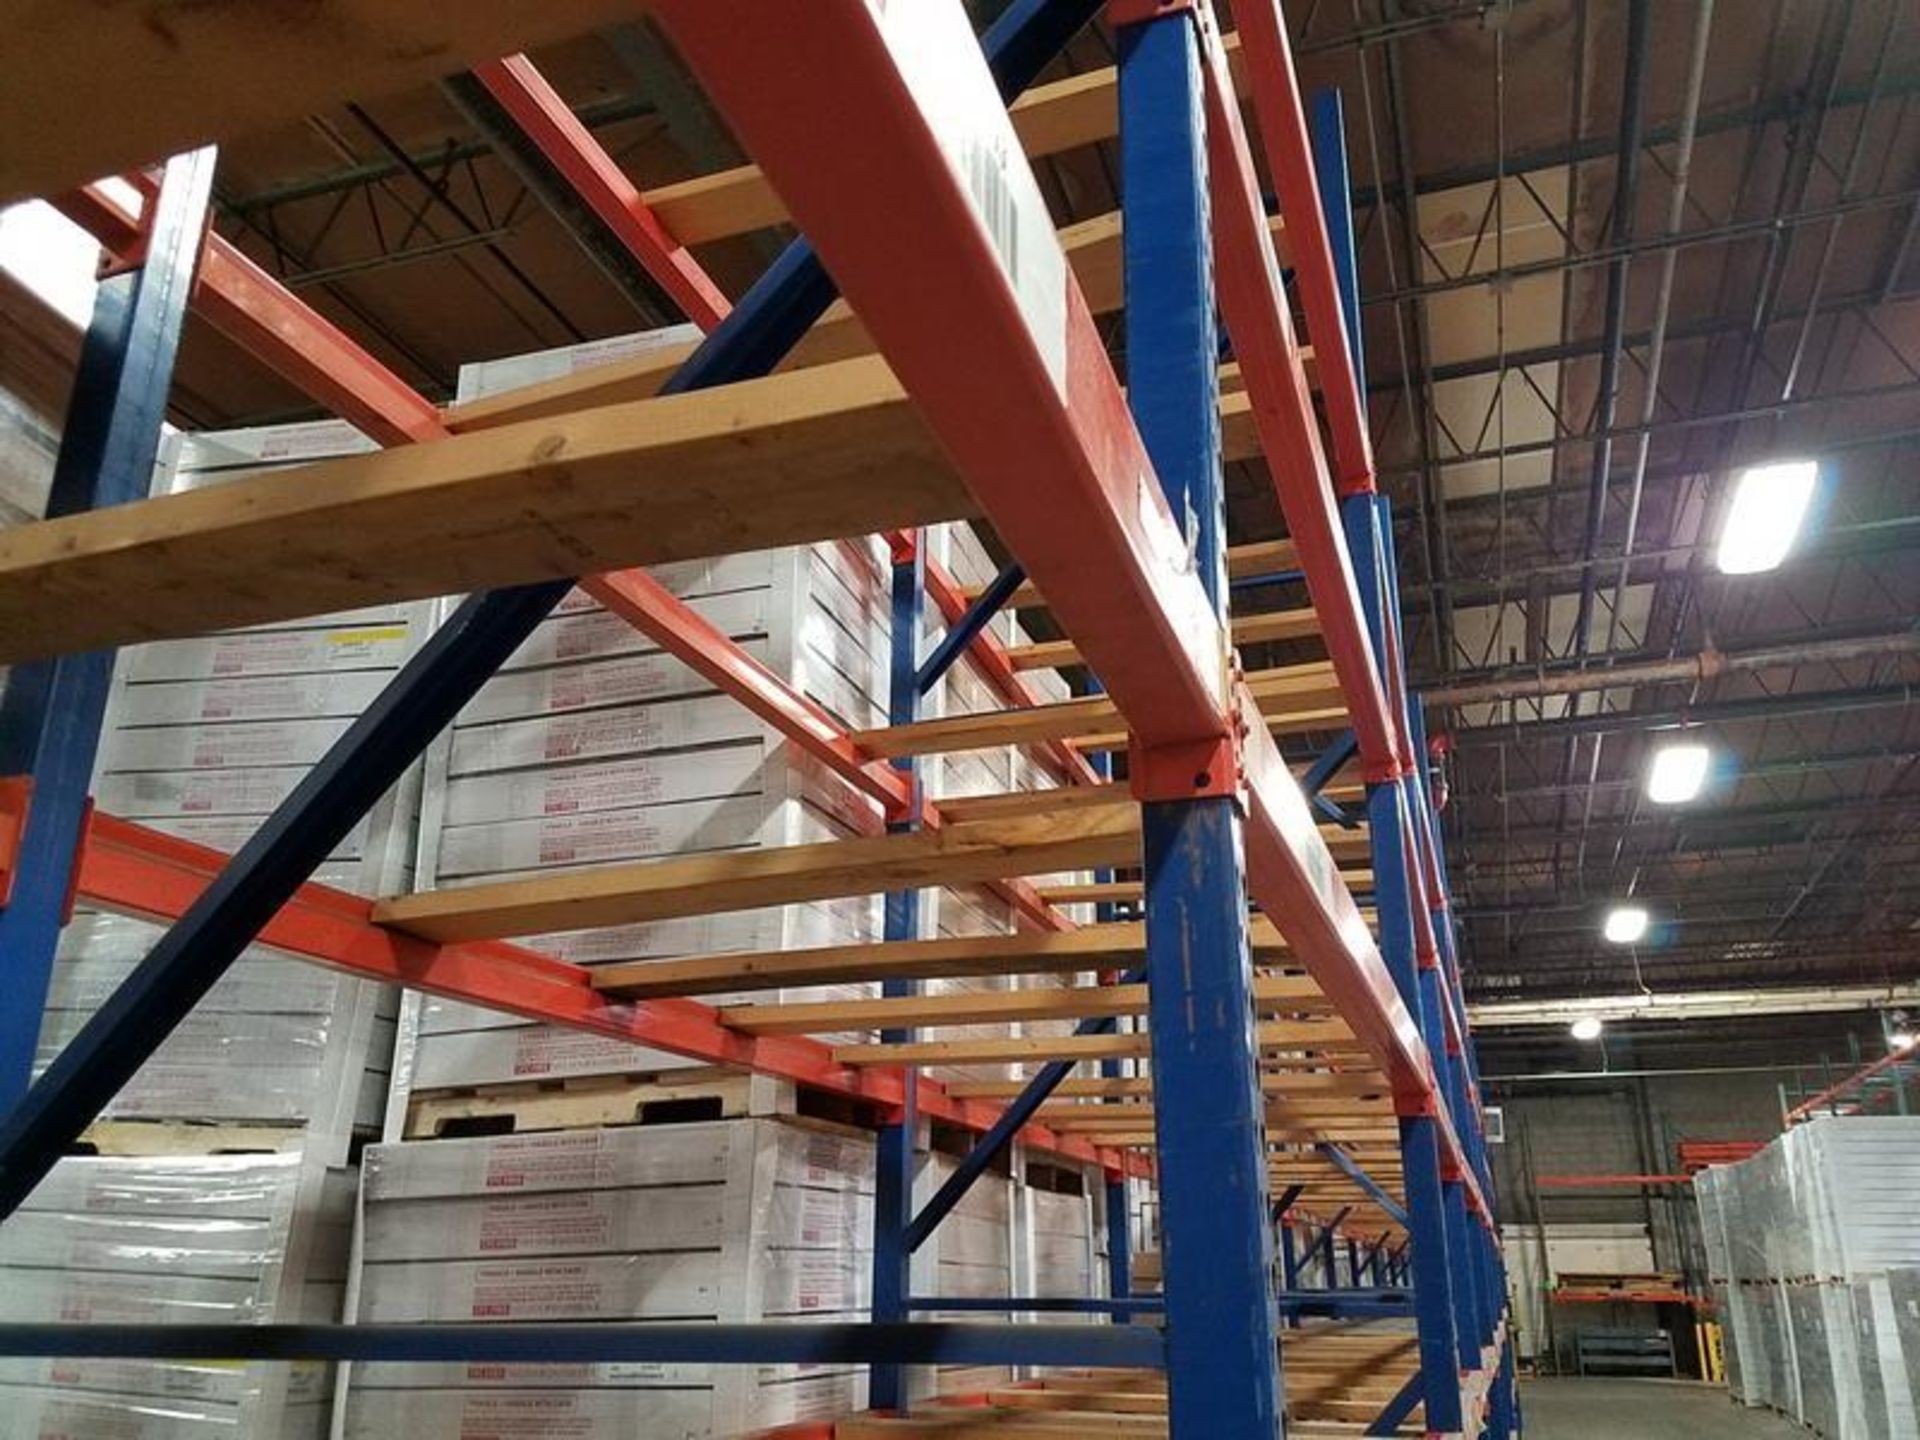 LOT (13) Sections of Adjustable Pallet Racking, 8' x 54" x 19'H (approx.), Contents Not Included - Image 2 of 2